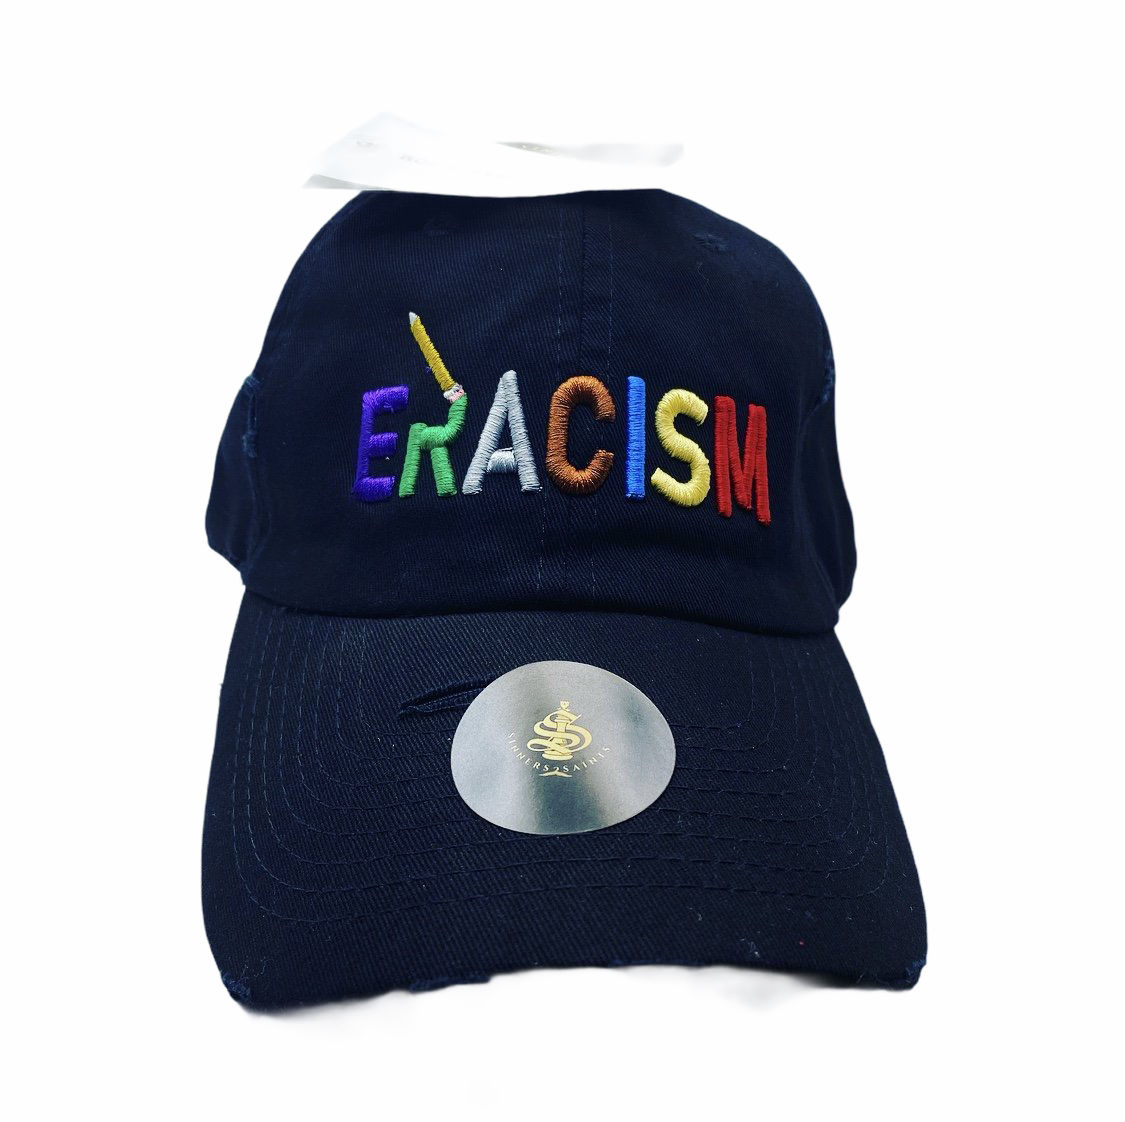 Eracism Hats/Caps - Different colors One people - Limited release - TheSinners2Saints